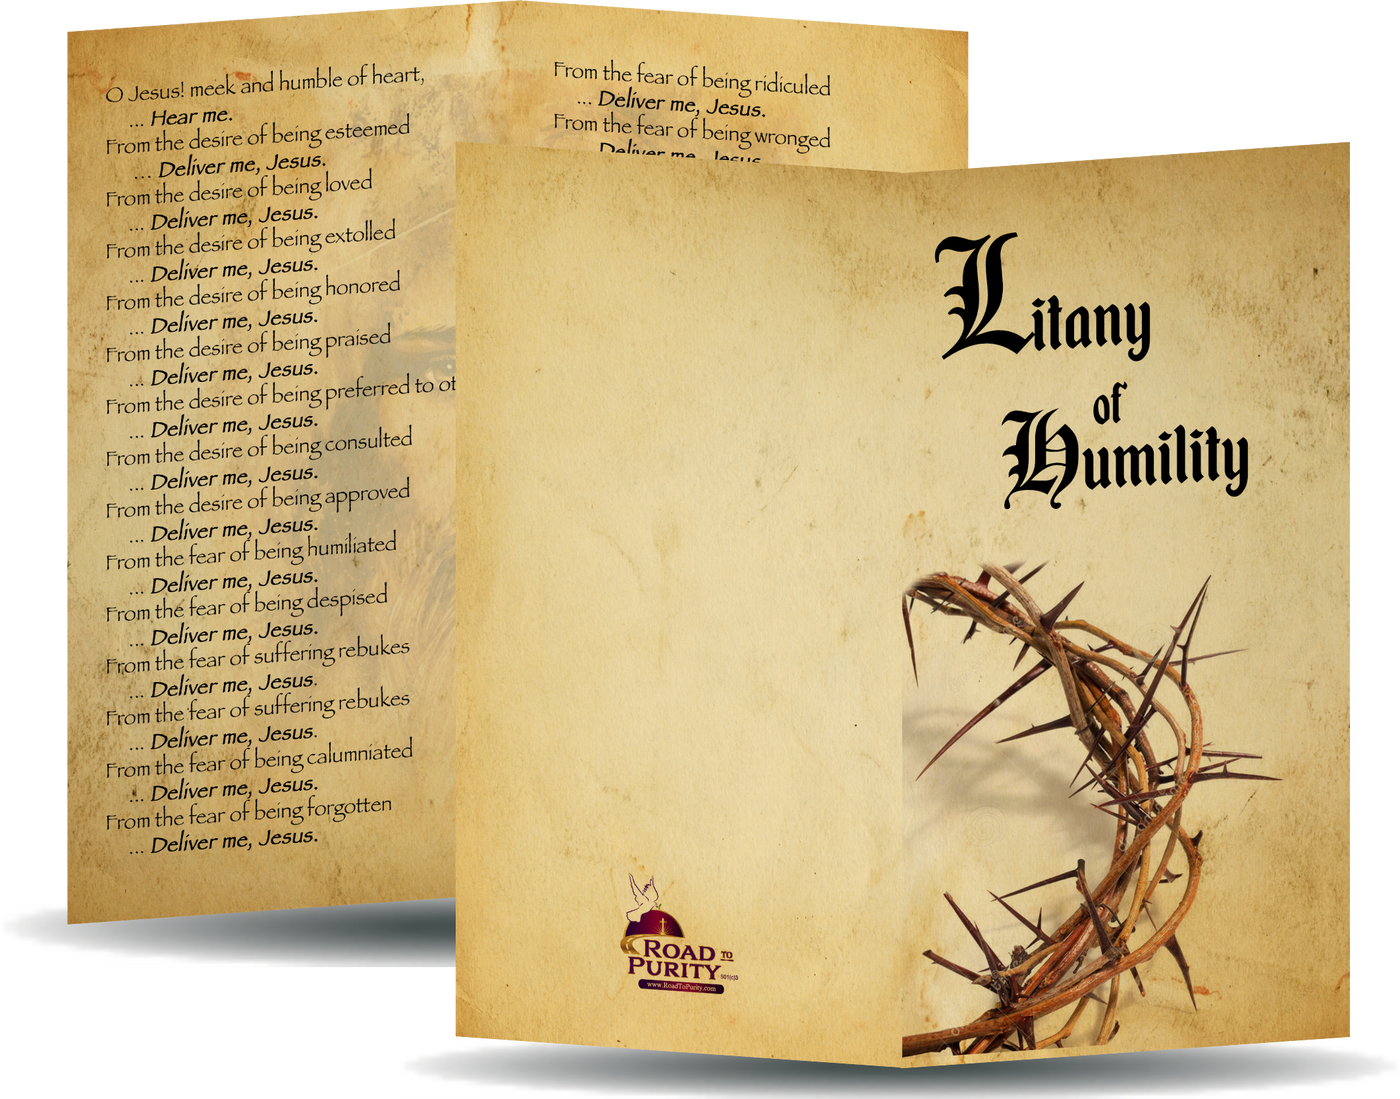 Litany of Humility, new for 2019